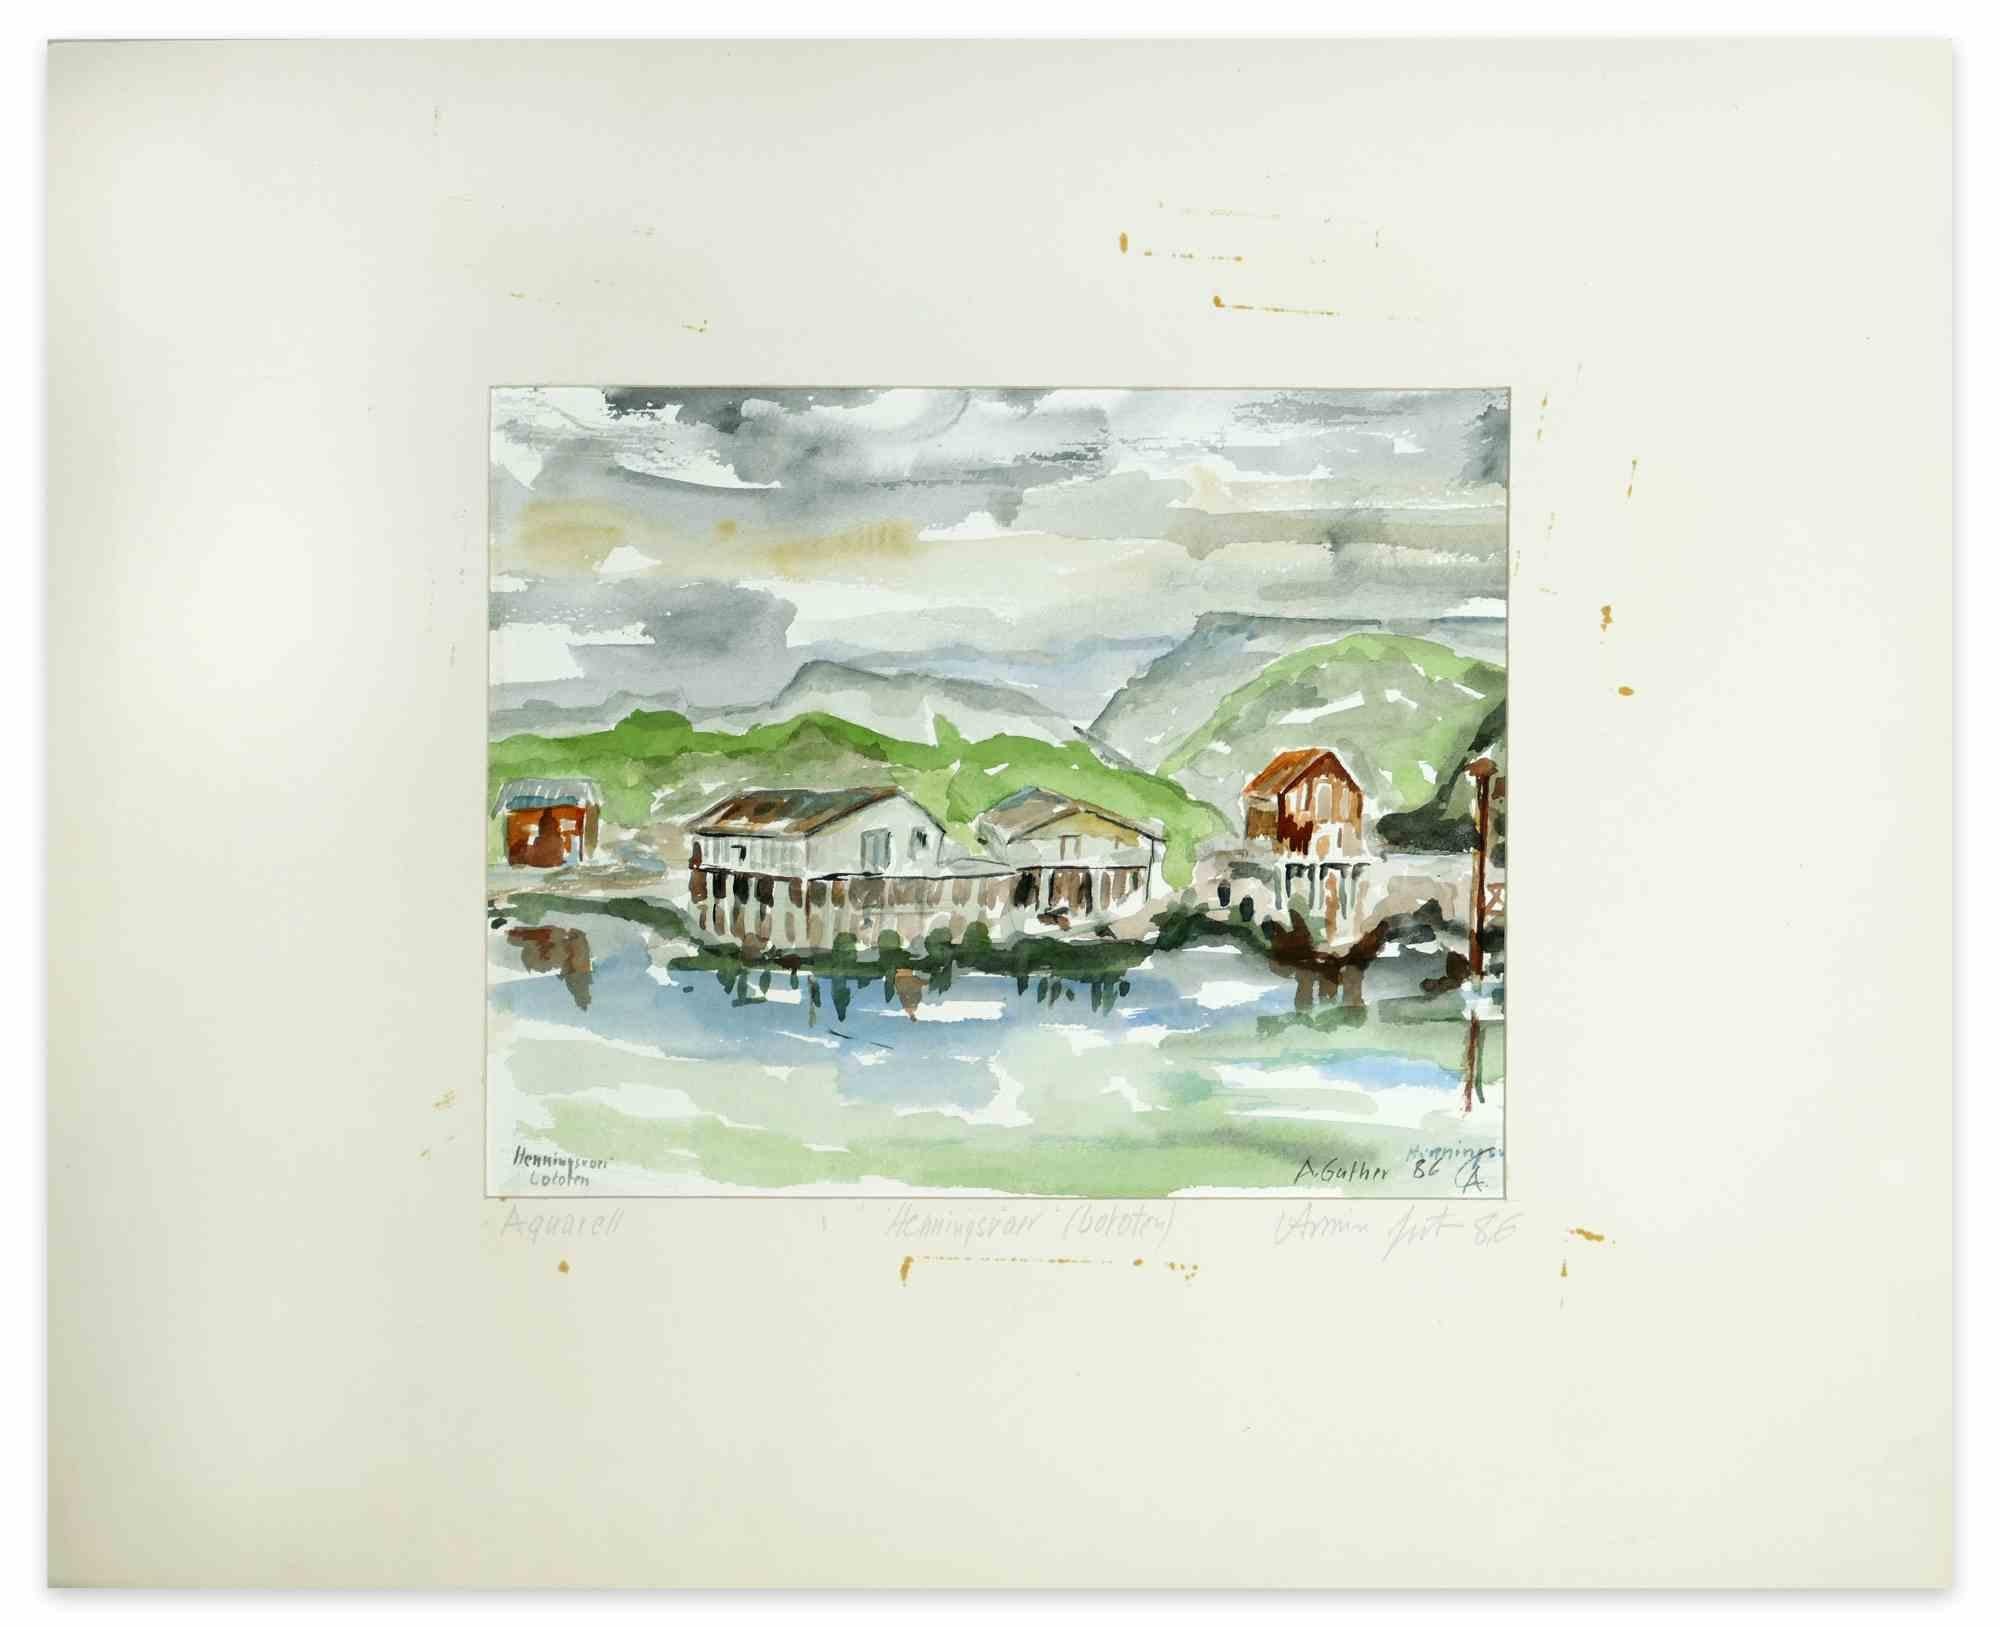 View of Henningsvaer Lofoten - Watercolor by Armin Guther - 1986